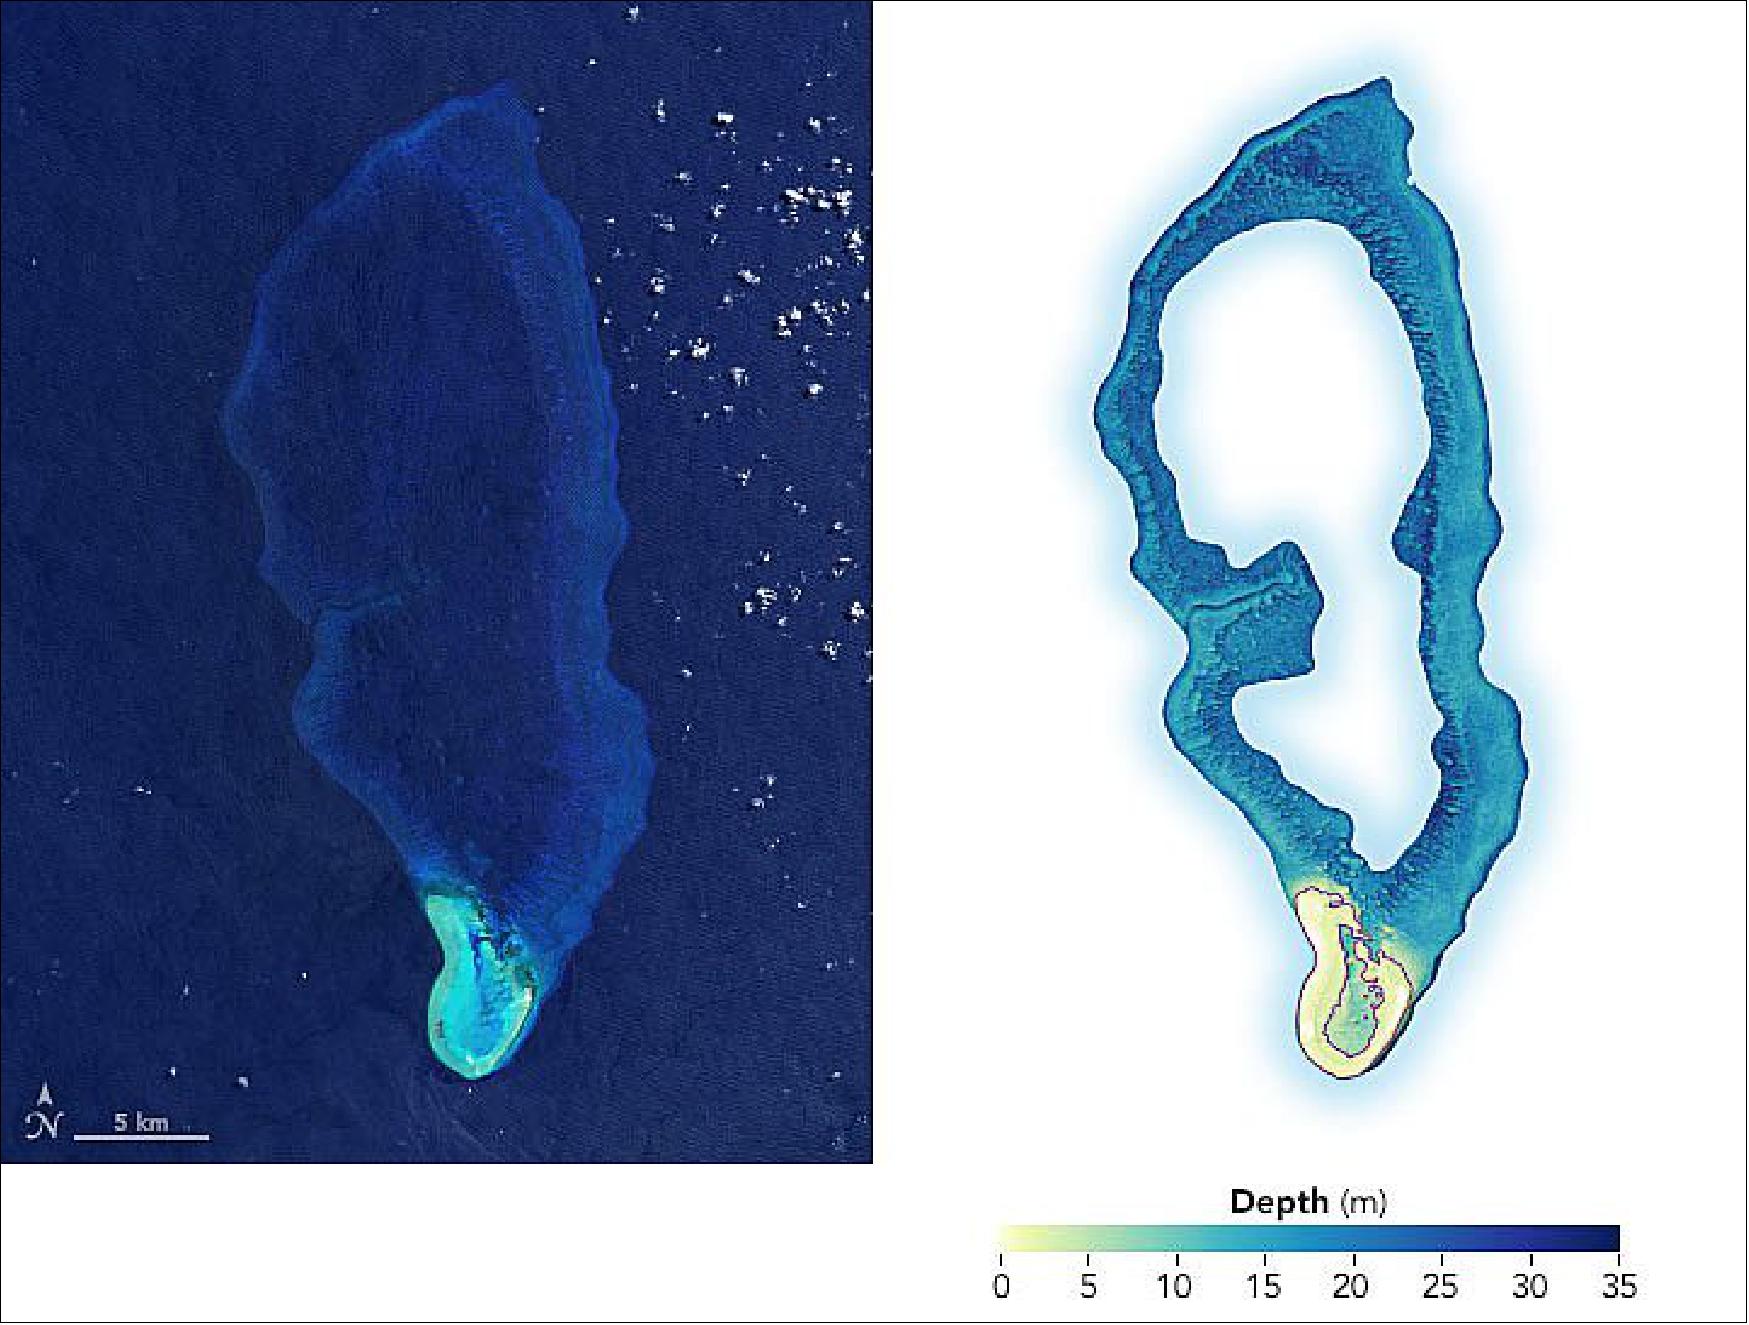 Figure 26: The images show Velasco Reef in the Republic of Palau. The left, natural-color image of the South Pacific reef was acquired by Landsat 8 in 2020; the right image is a digital elevation model created with ICESat-2 data. The map was developed as part of a demonstration study led by remote sensing scientists Lori Magruder of the University of Texas at Austin and Chris Parrish of Oregon State University. They partnered with the Coral Reef Research Foundation in Palau to fuse existing sonar data with their ICESat-2 dataset (image credit: NASA Earth Observatory images by Joshua Stevens, using Landsat data from the U.S. Geological Survey and data from the Shallow Bathymetry Everywhere project. Story by Andi Thomas, with Mike Carlowicz)